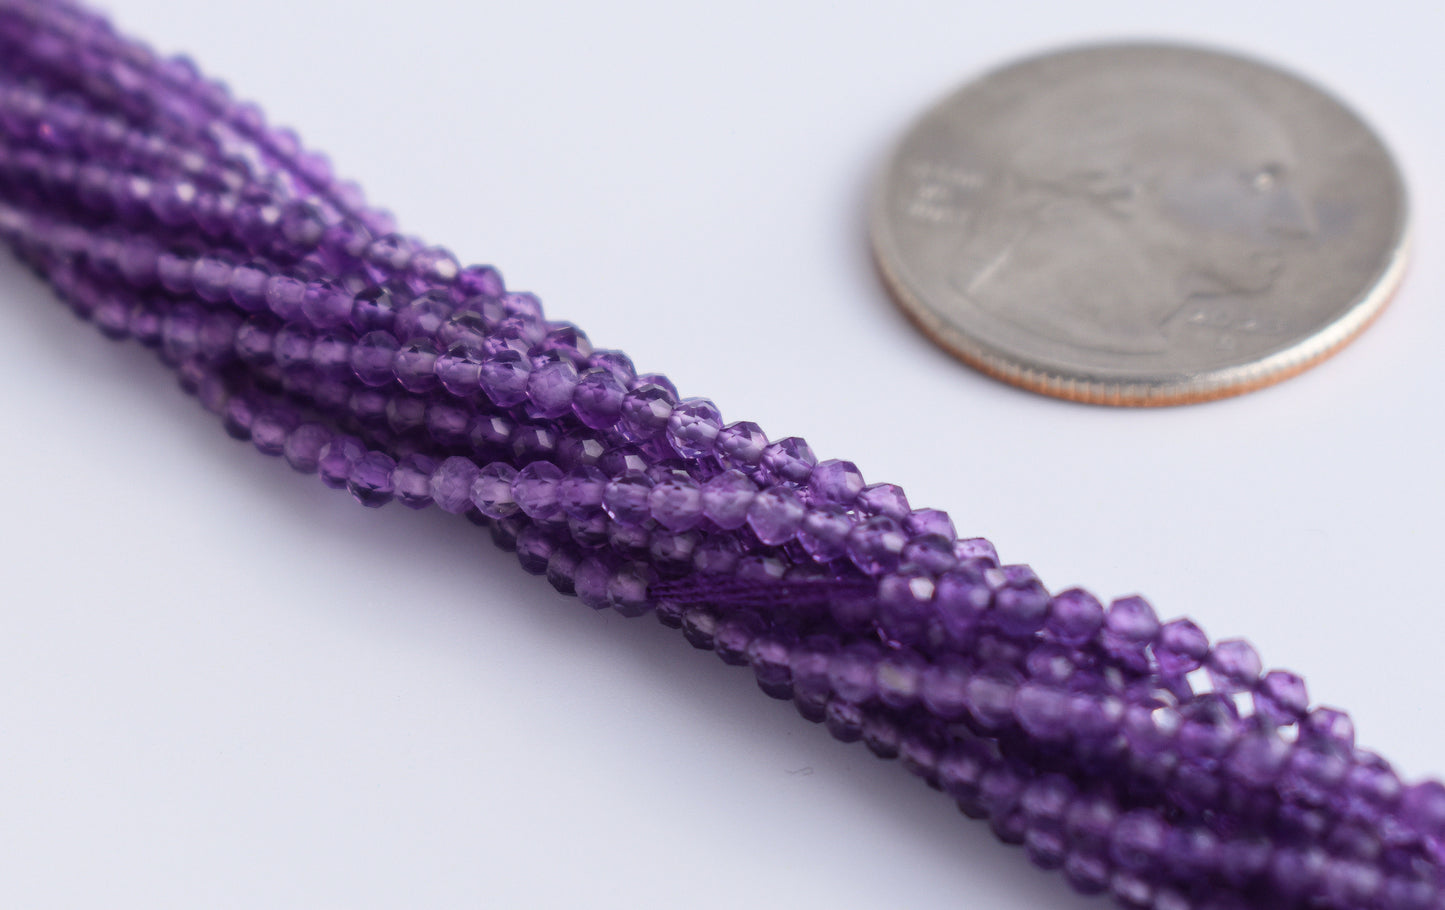 Amethyst Faceted Rondelle Beads 1.5x2mm